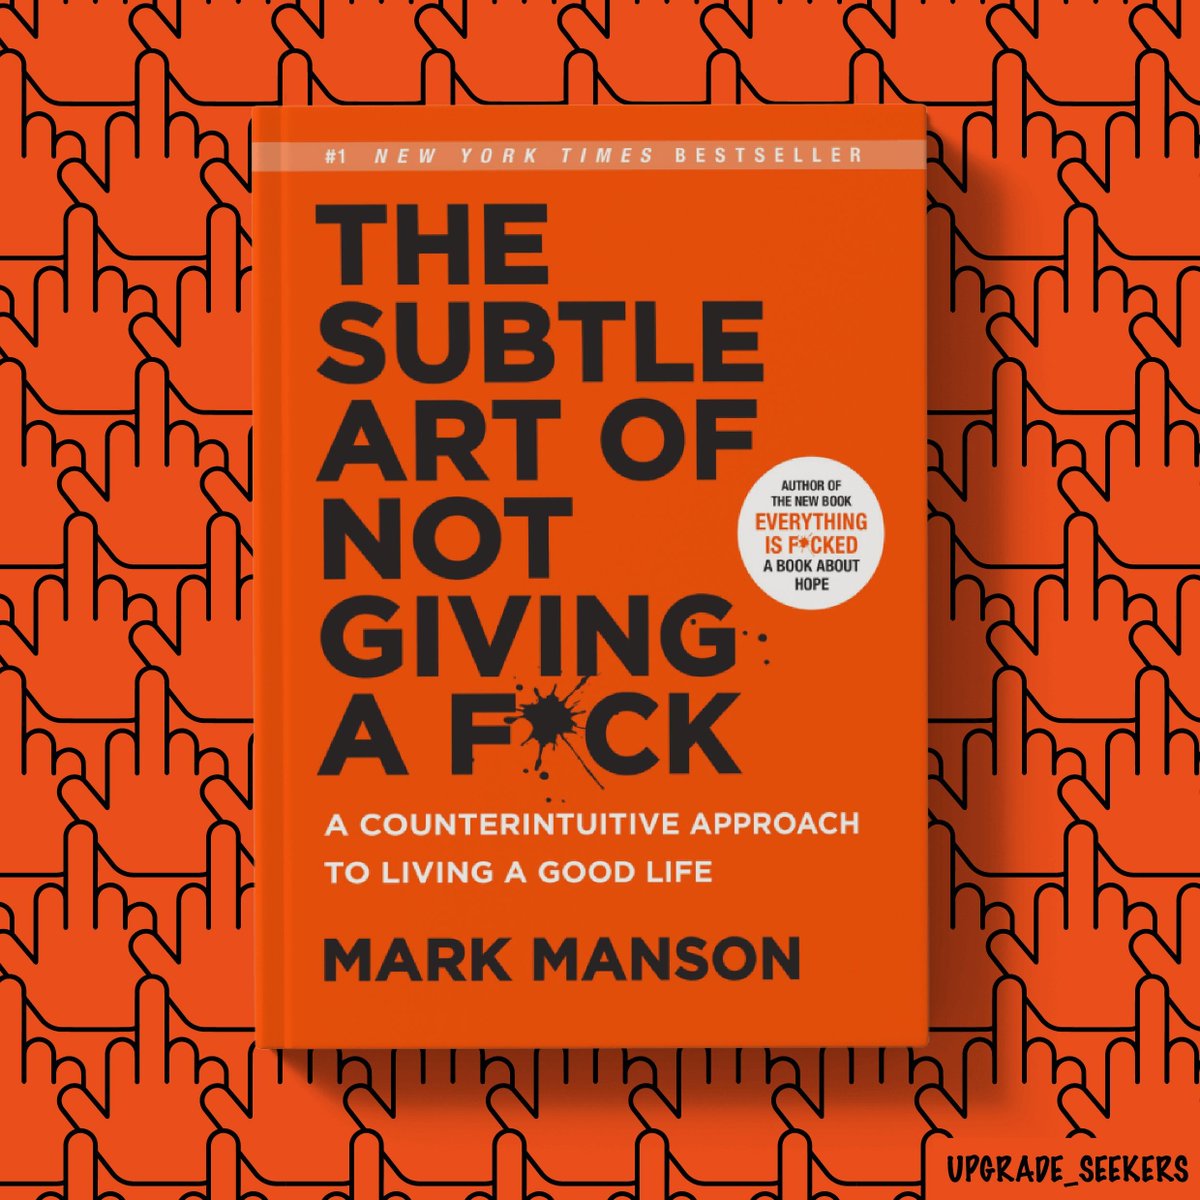 The Subtle Art of Not Giving a F*ck' is a self-help book.
This book challenges conventional self-help advice and encourages you to reevaluate your values and priorities.

#upgrade_seekers #upgradeseekers #thesubtleartofnotgivingafuck #markmanson #liveyourbestlife